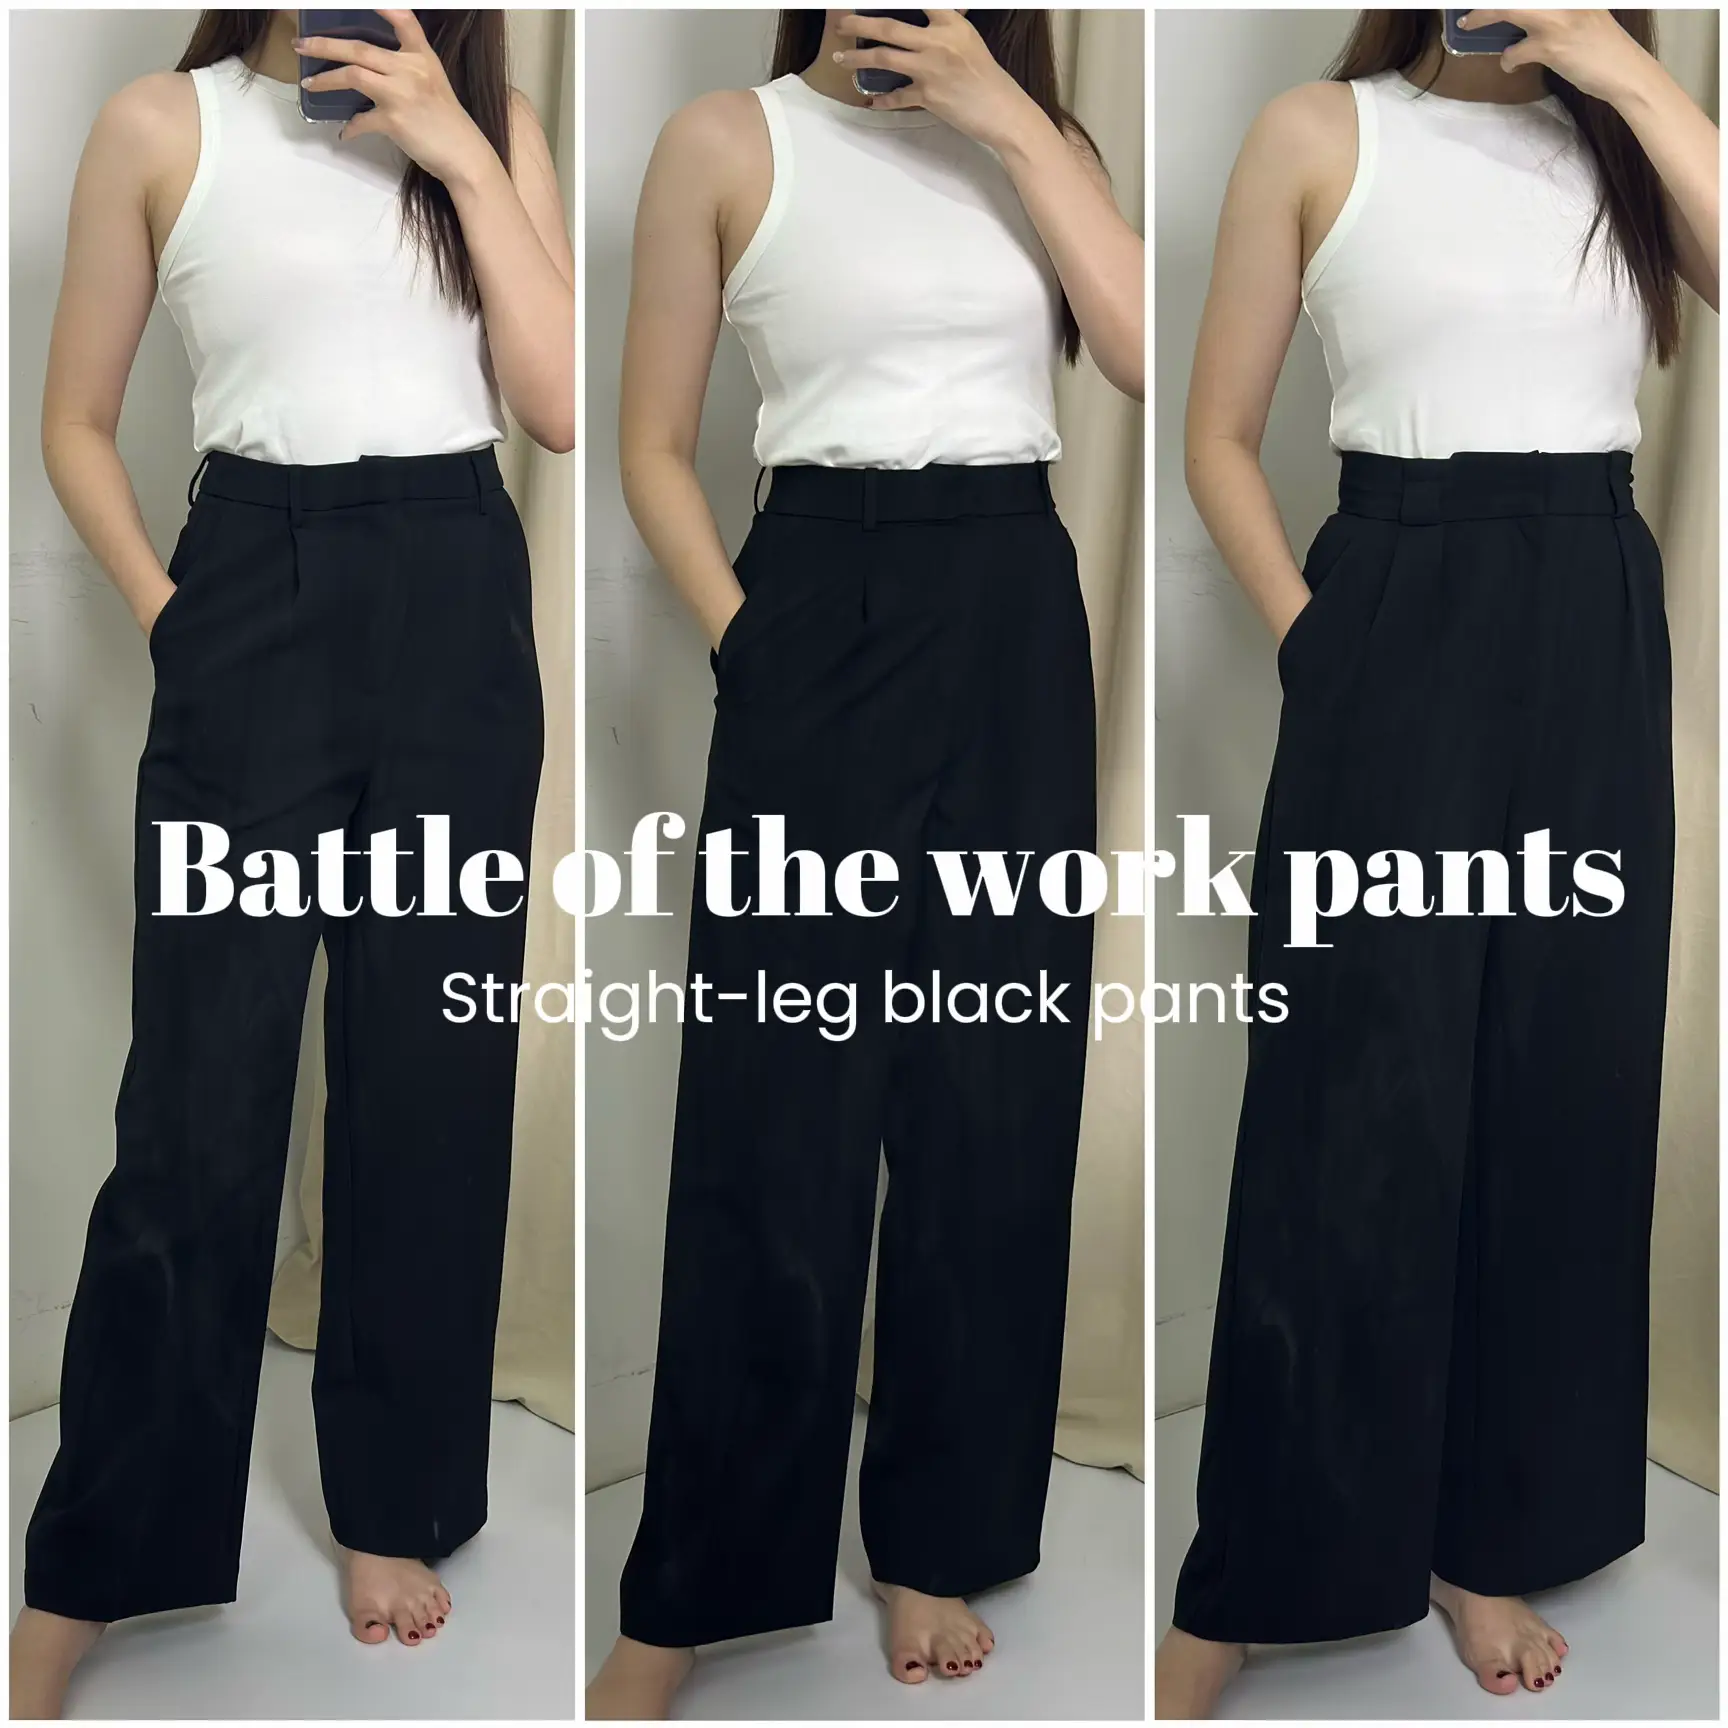 WOMEN vs MEN's pleated pants from uniqlo 👀, Gallery posted by cloudcalm